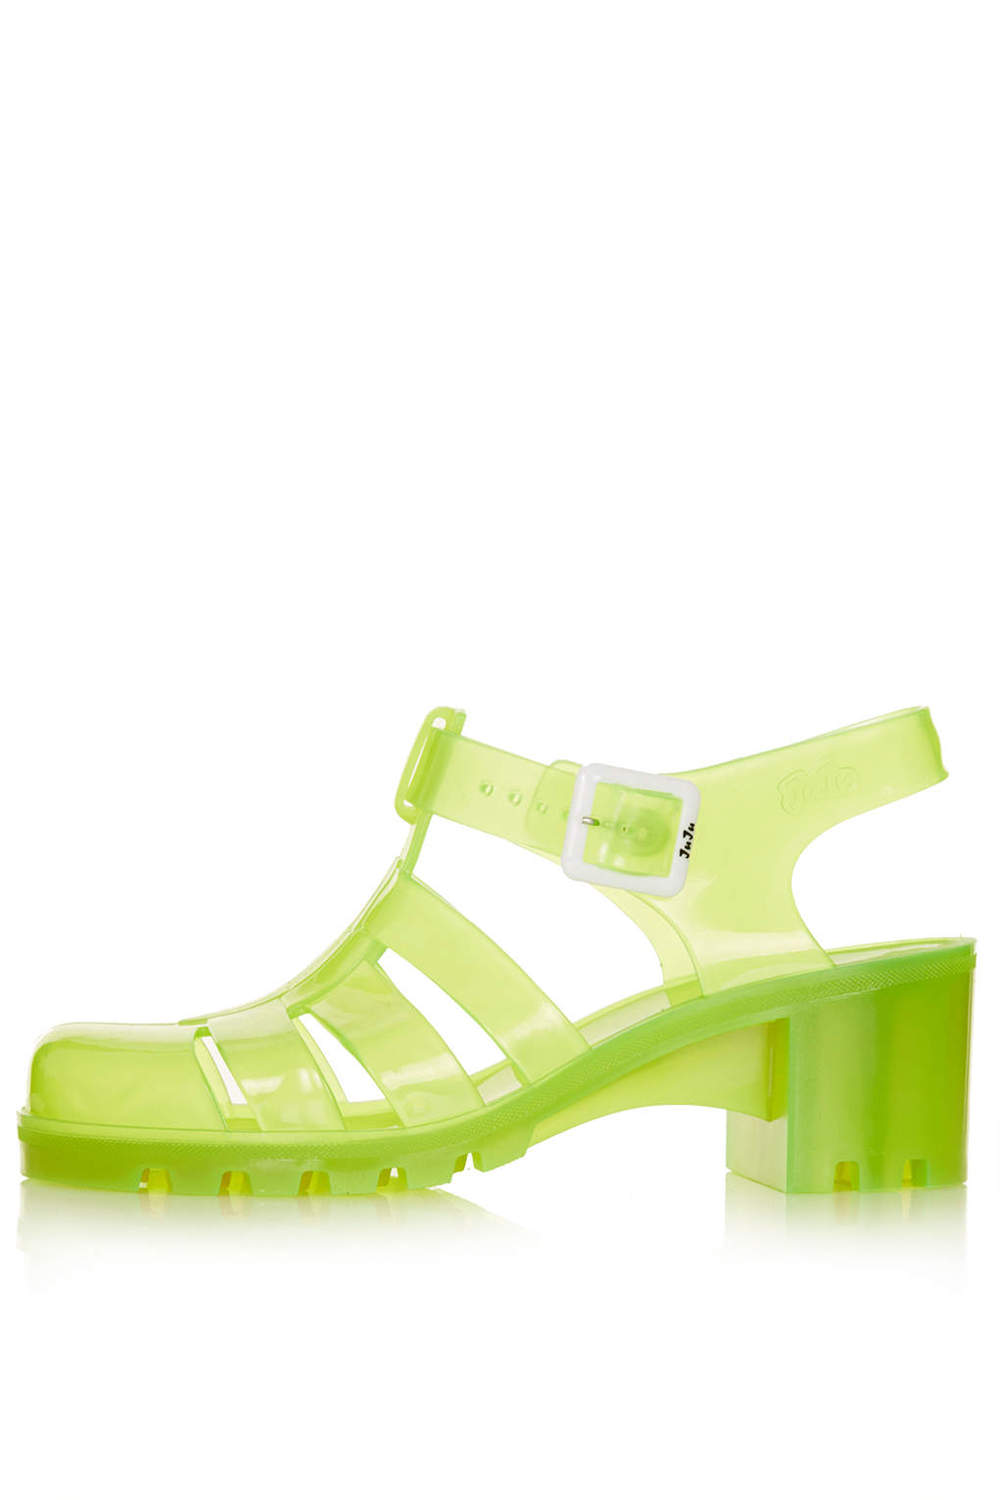  NINA Fluro Jelly Sandals. Topshop. $45. Just to be clear. I'm not telling you not to wear the heels with socks trend, just not those socks with these heels.  